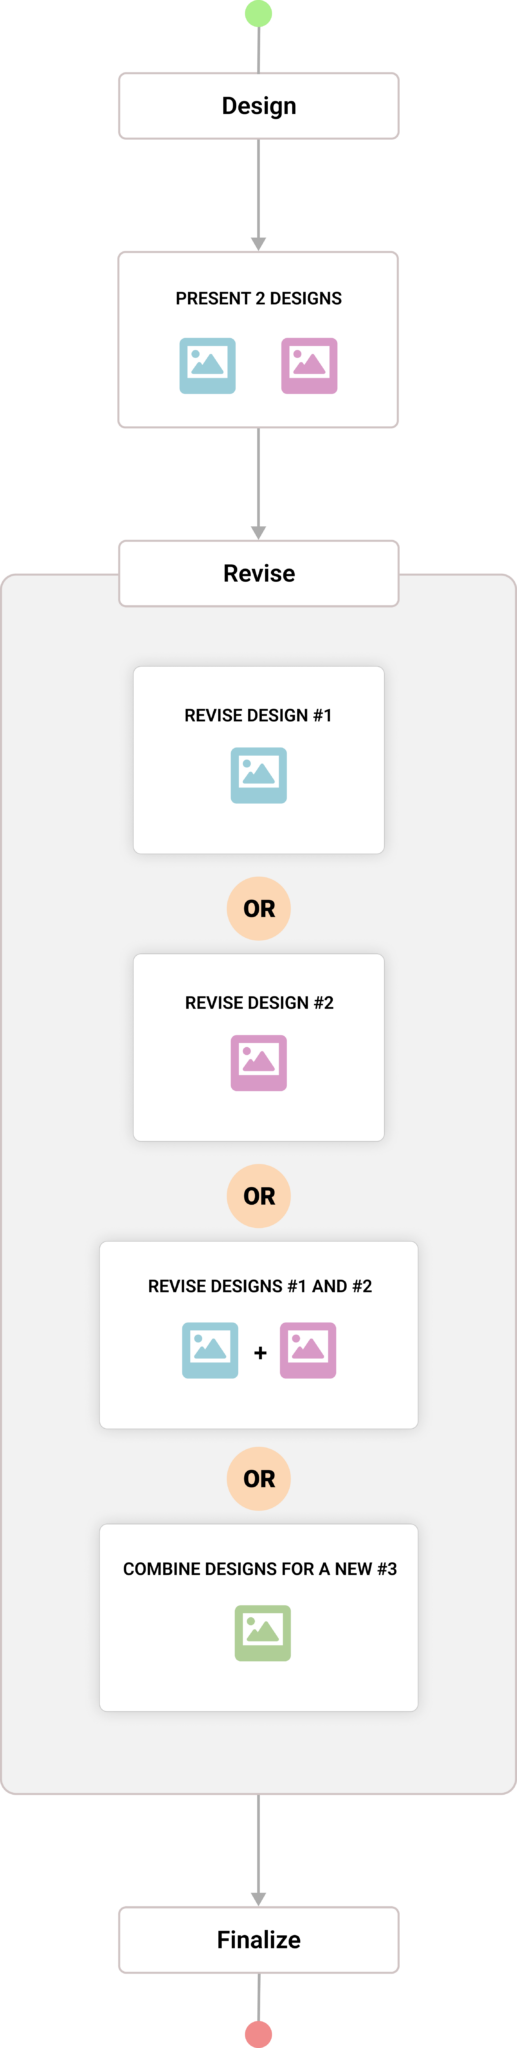 design process with many design choices